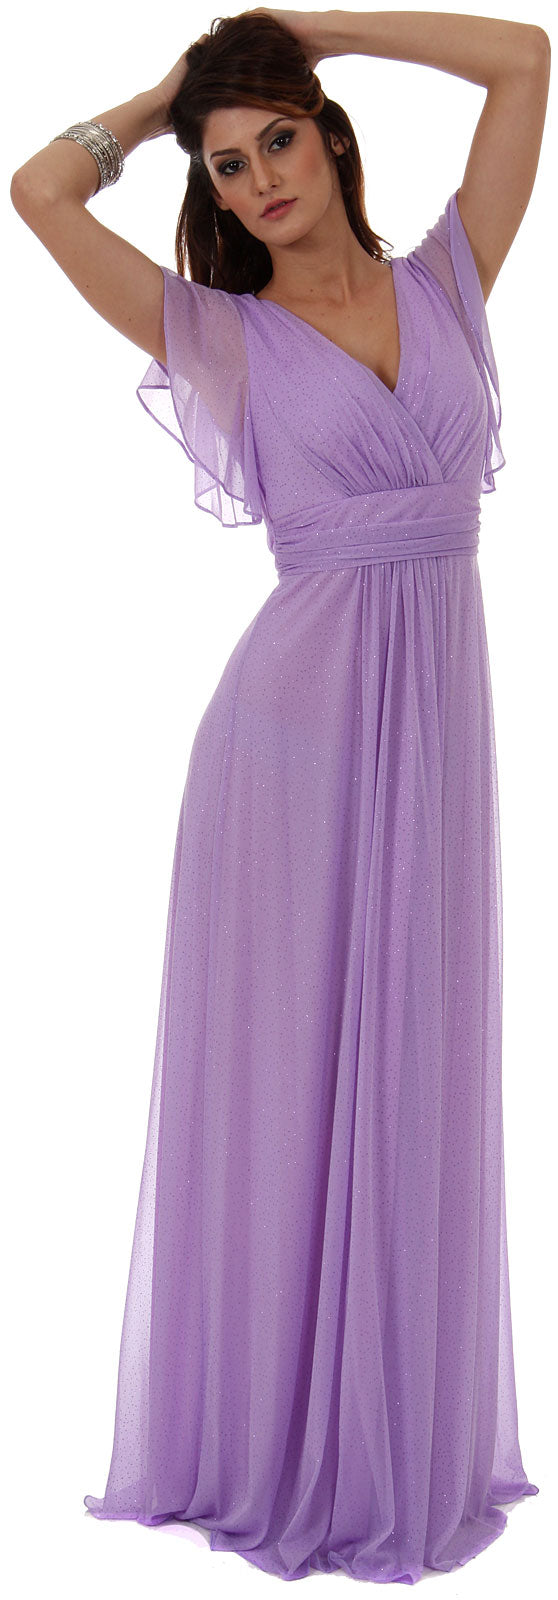 Image of Glittered V-neck Long Formal Dress With Flutter Sleeves in Lilac